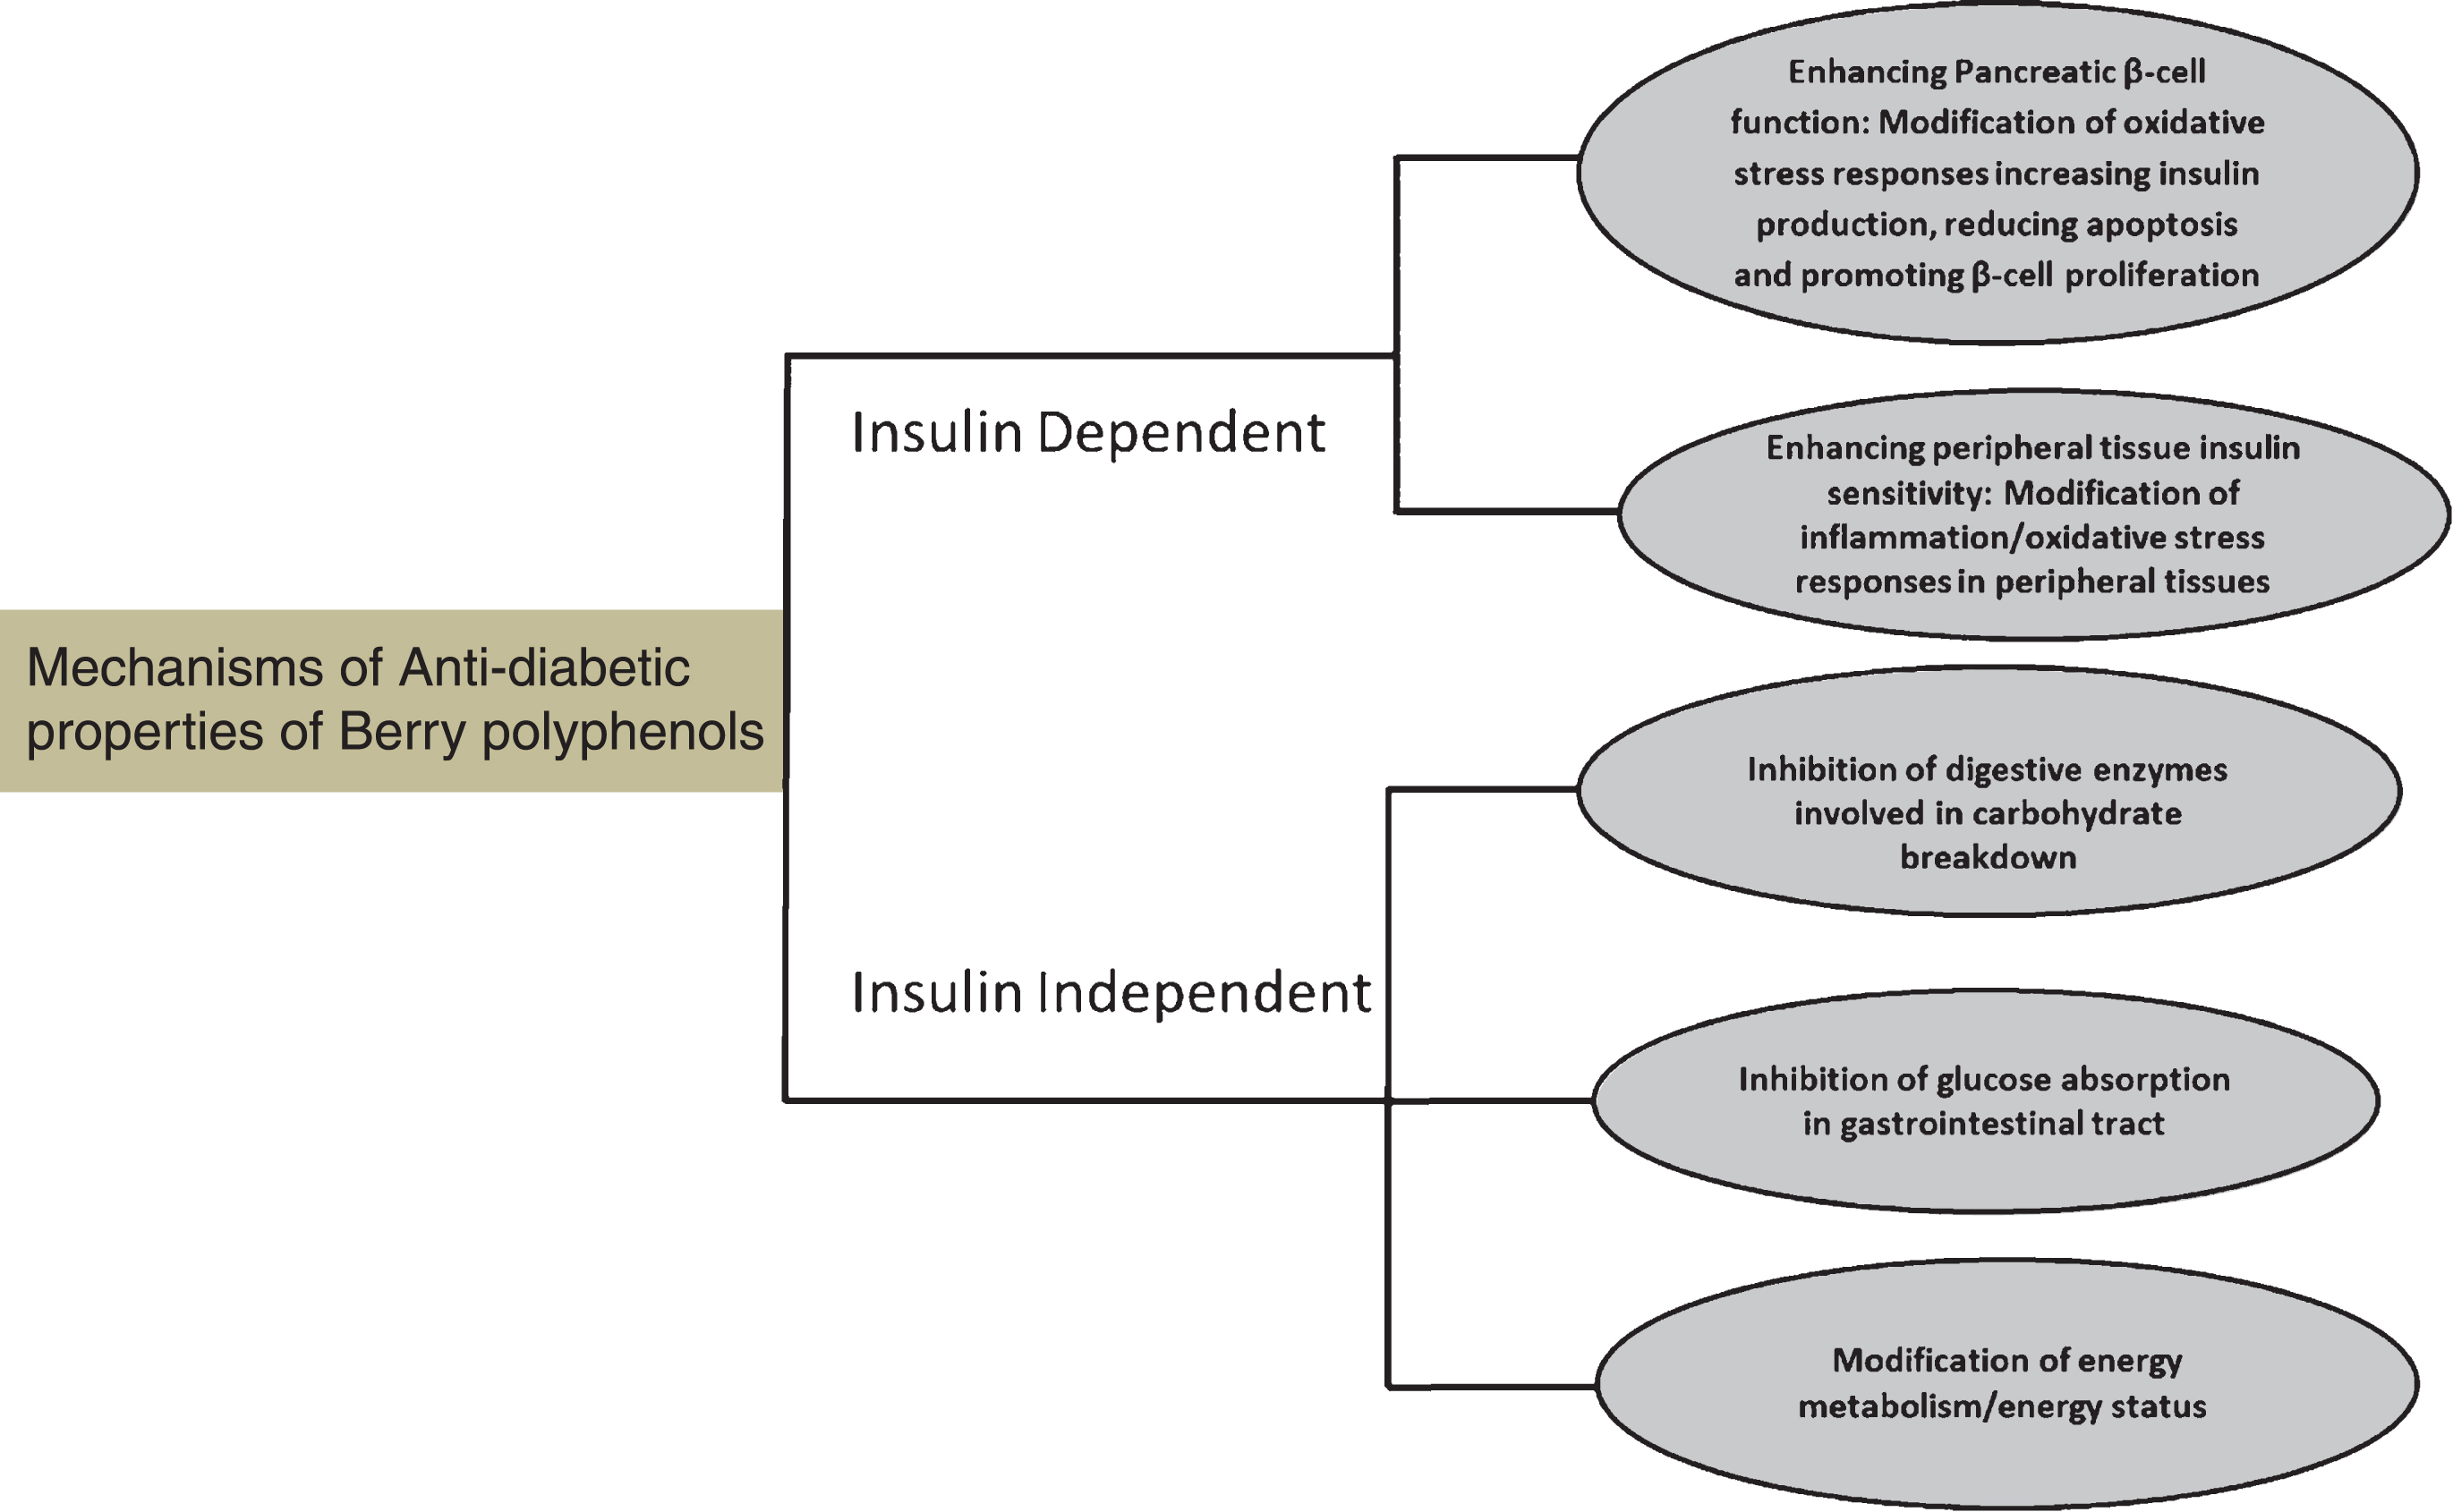 Berry polyphenols exert anti-diabetic effects by several interrelated mechanisms through insulin dependent and insulin independent mechanism.